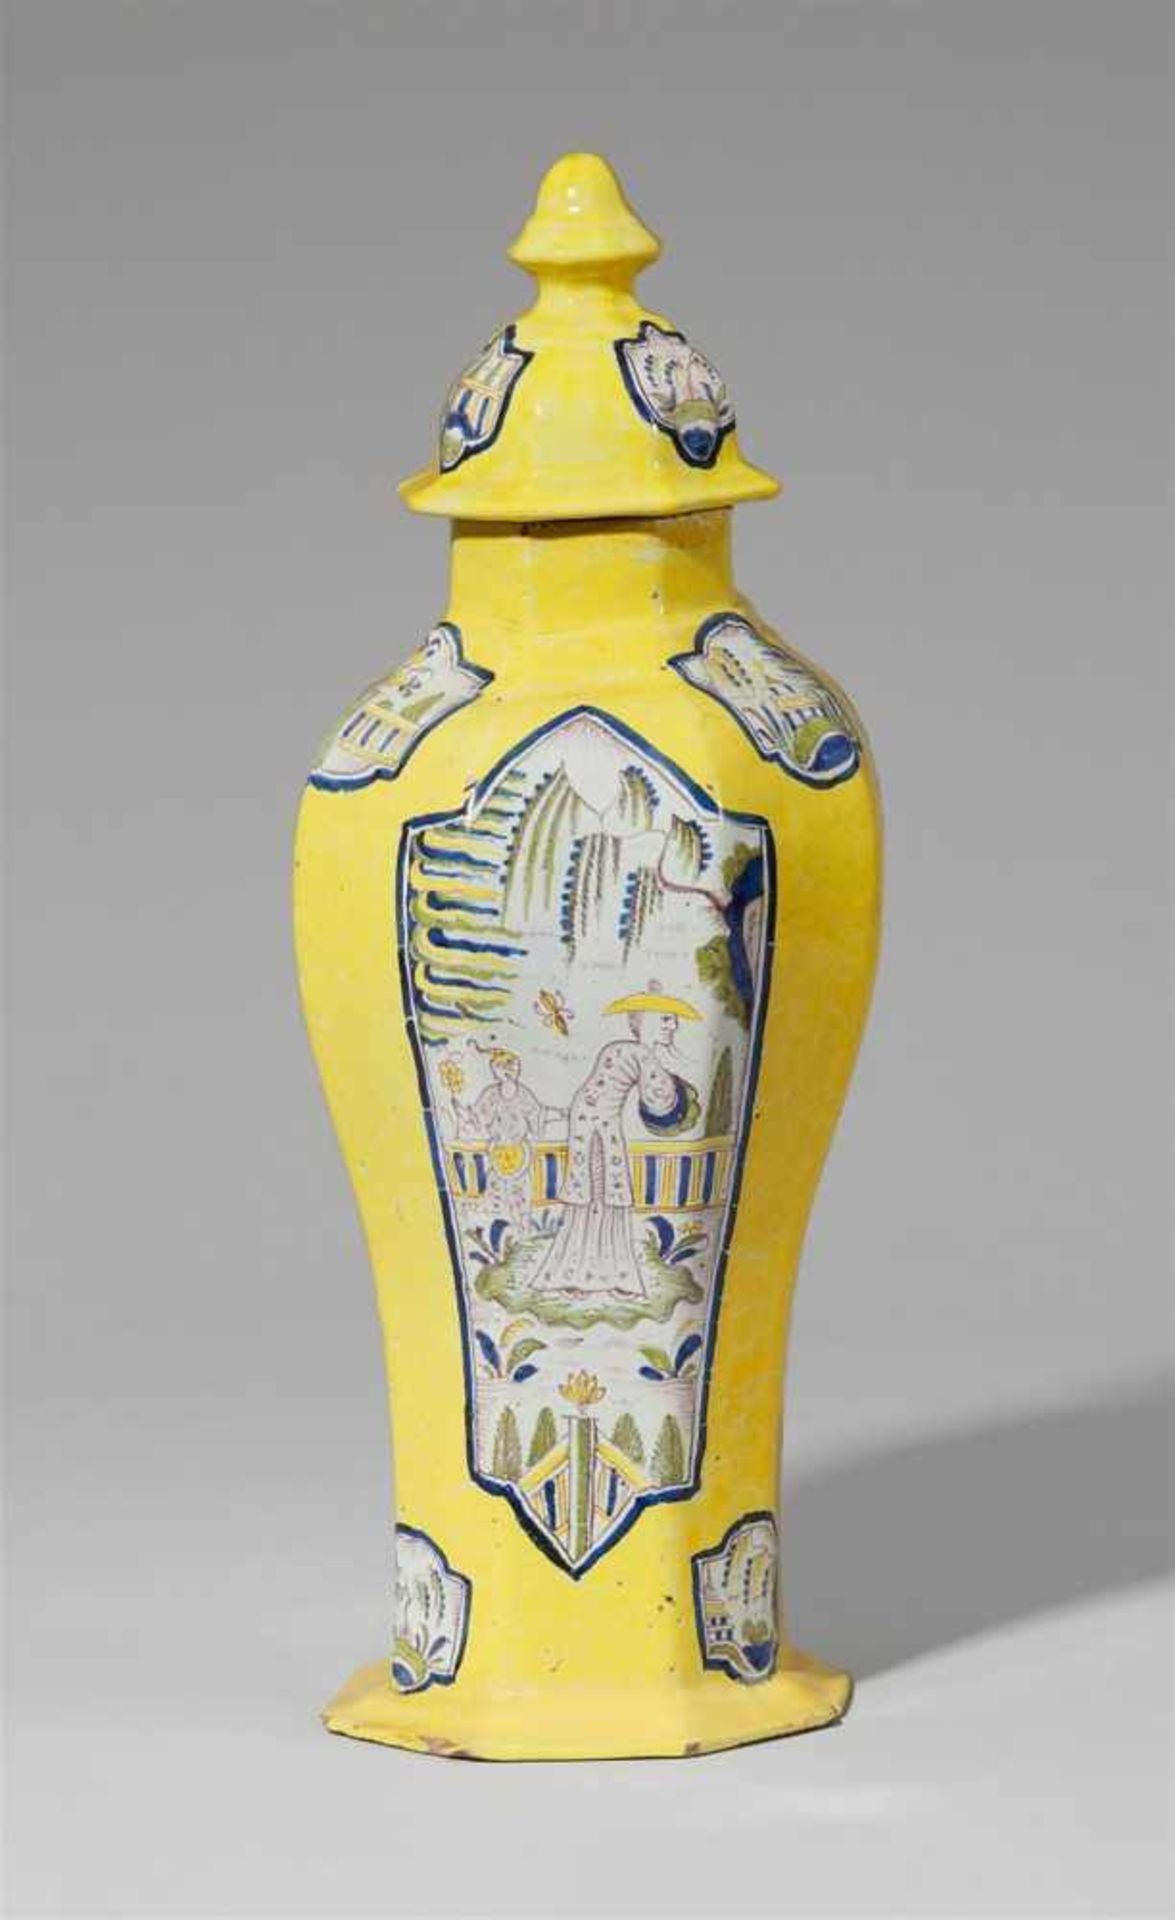 A yellow Zerbst faience vase and cover with Chinoiserie decorNarrow baluster-form vase with